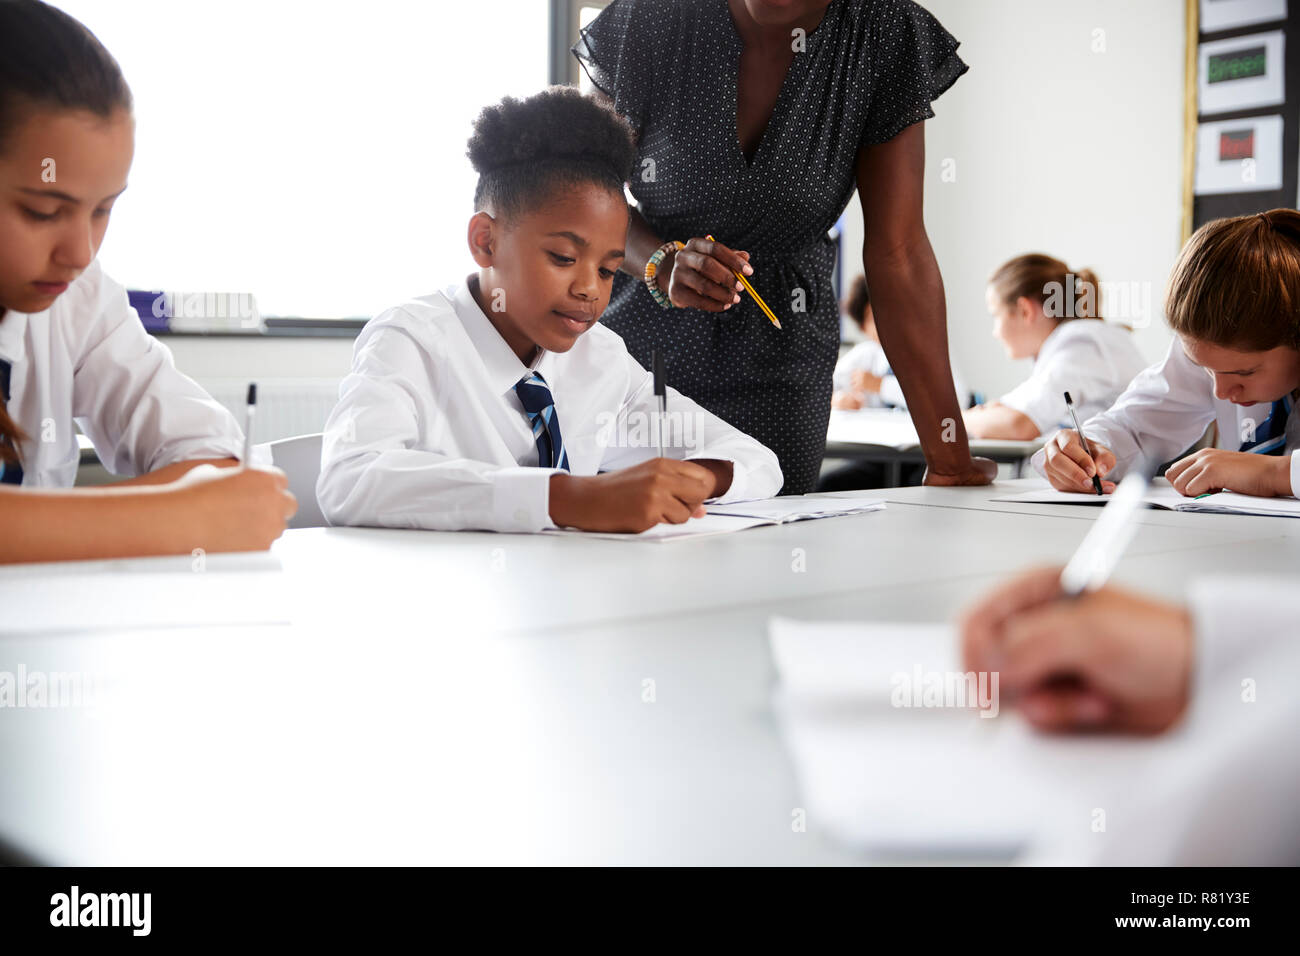 Female High School Tutor Helping Students Wearing Uniform Seated Around Tables In Lesson Stock Photo